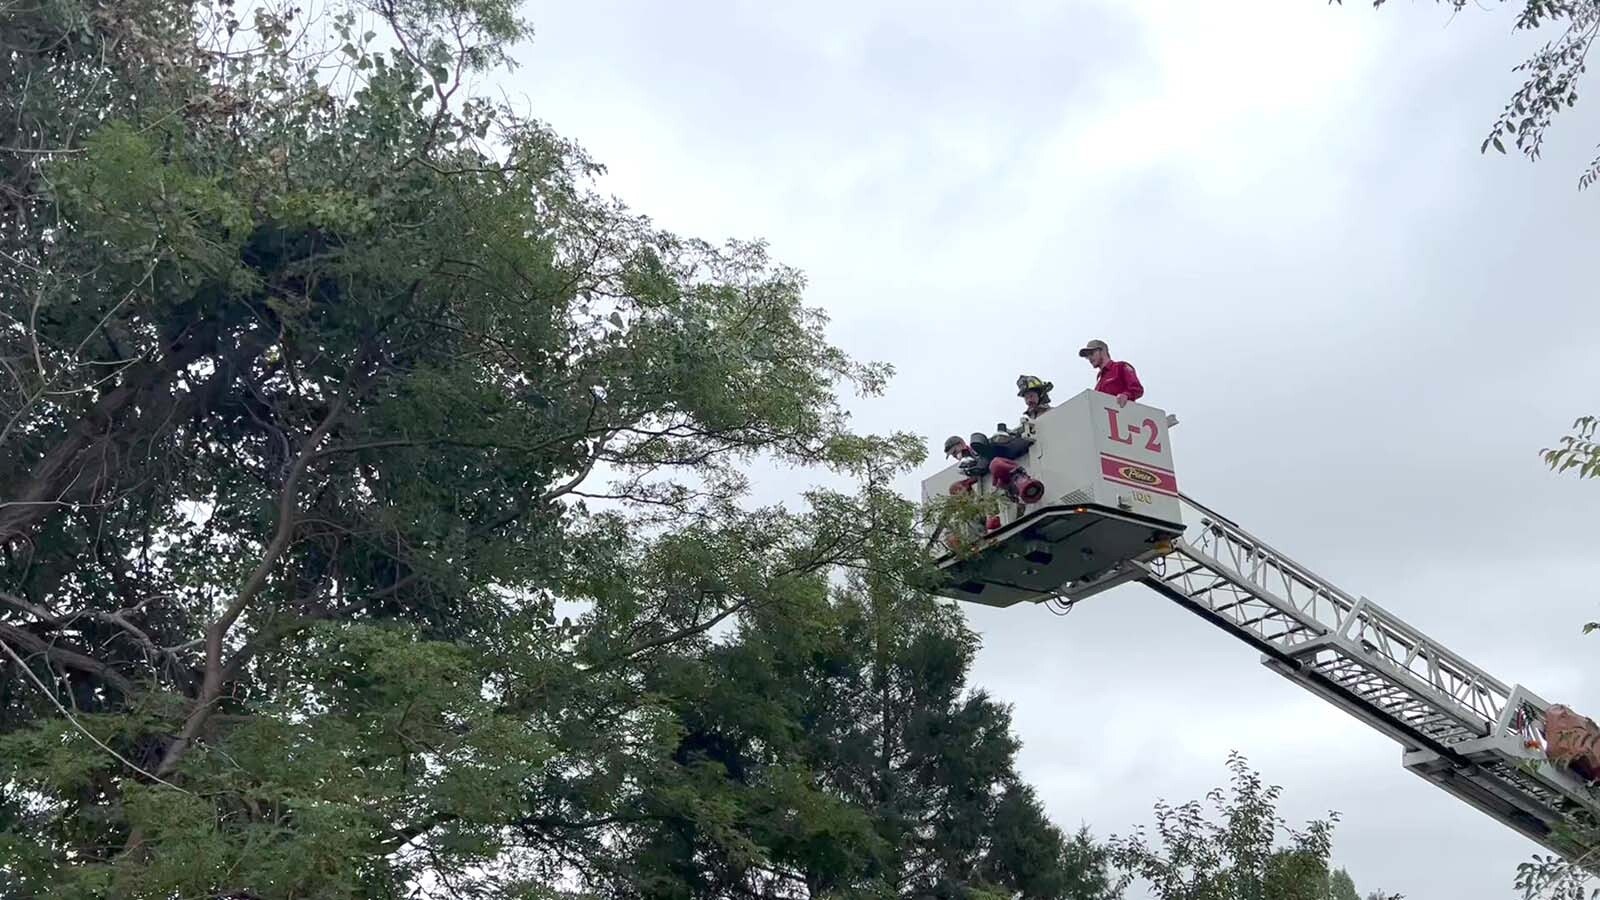 A cherry picker was used to try and get a bear out of a tree at Cheyenne's Clear Creek Park on Sunday.